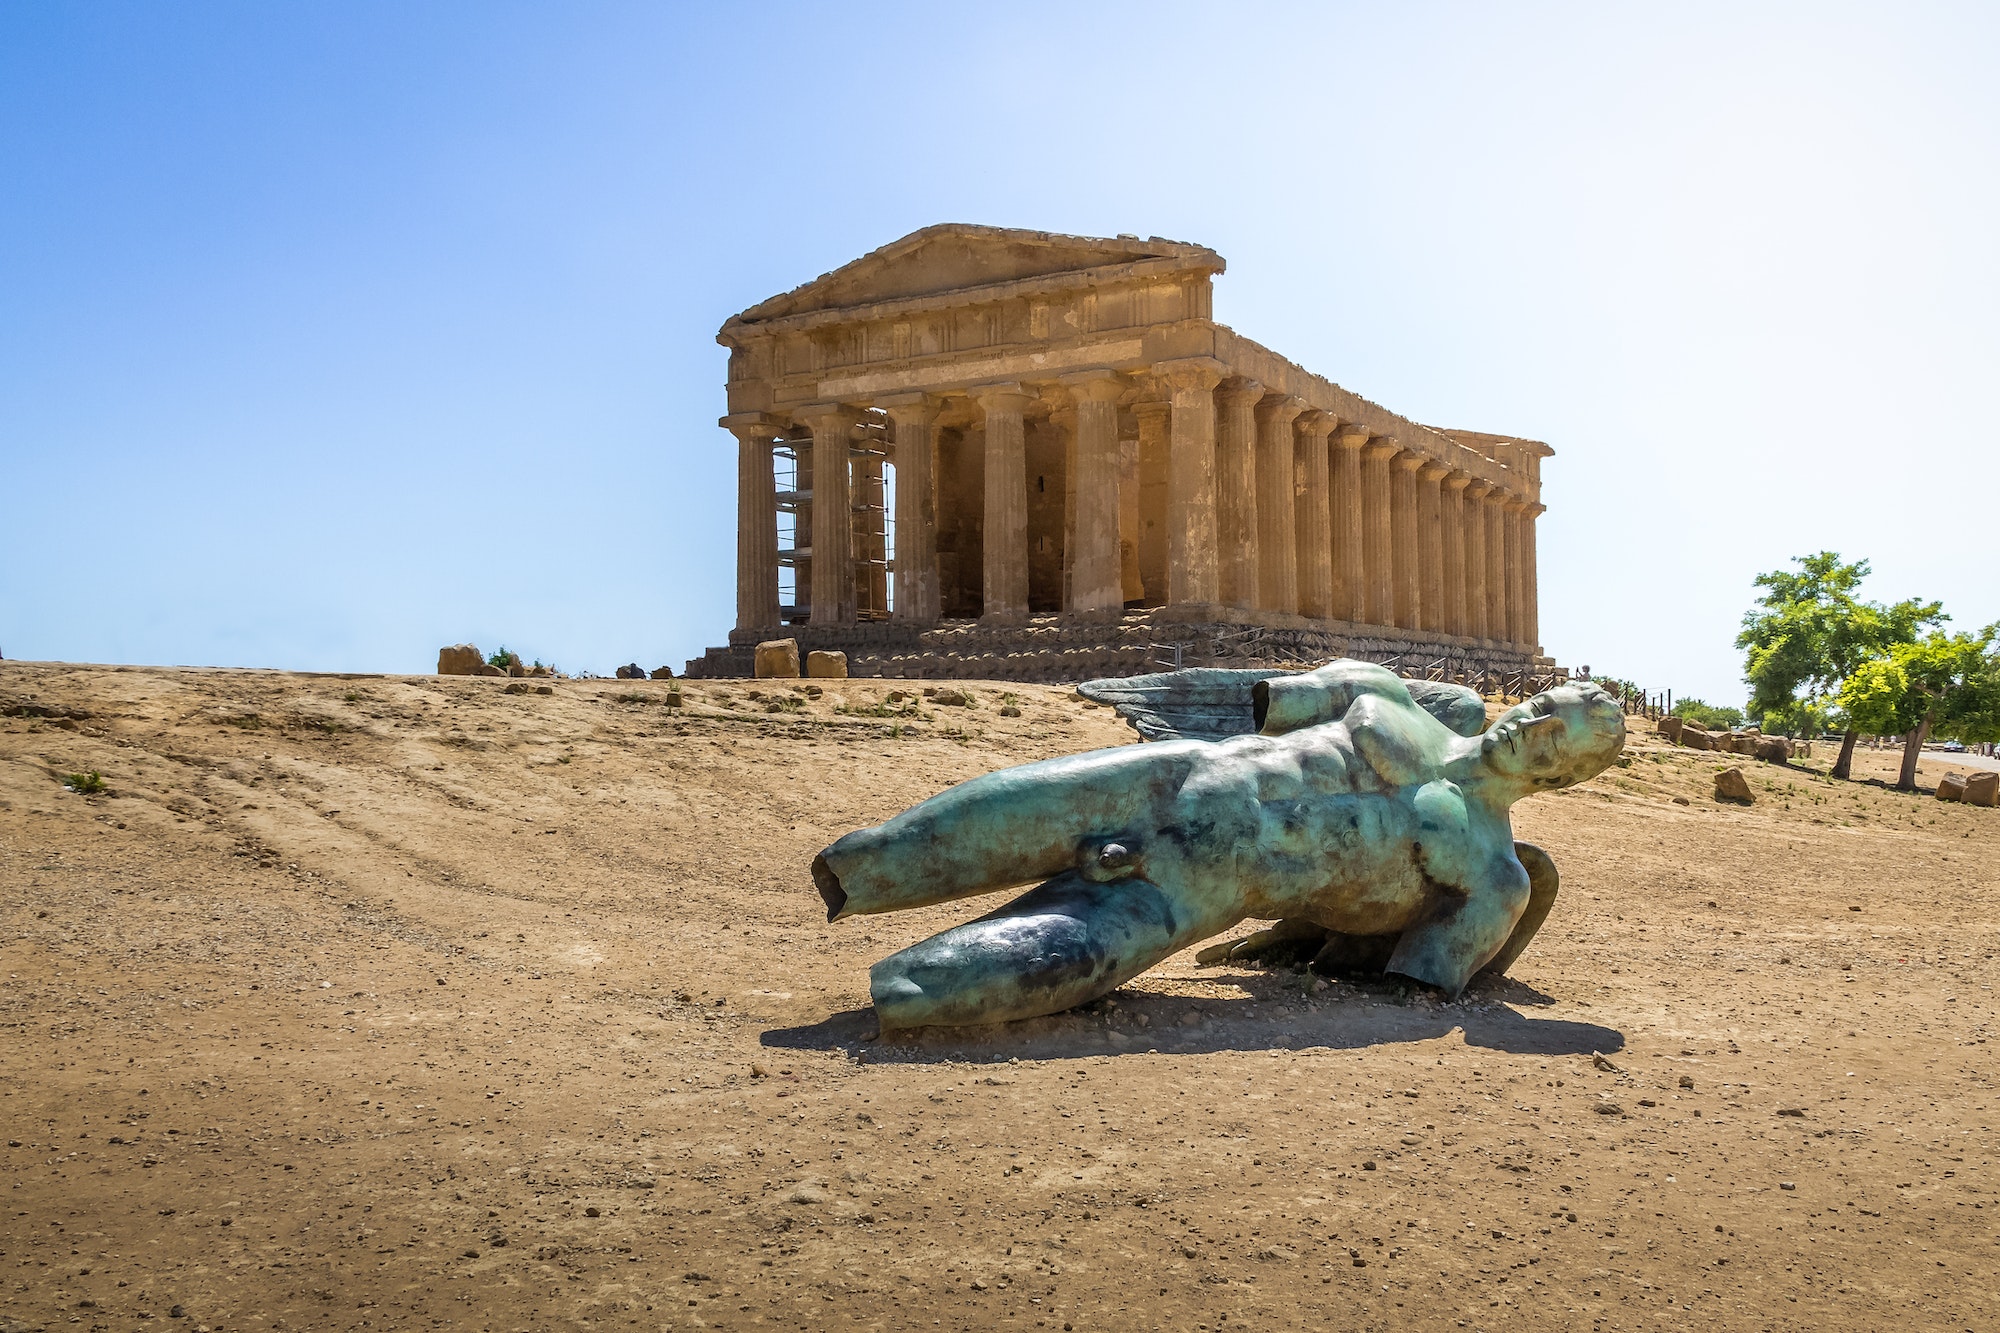 Icarus bronze statue and Temple of Concordia in the Valley of Temples - Agrigento, Sicily, Italy